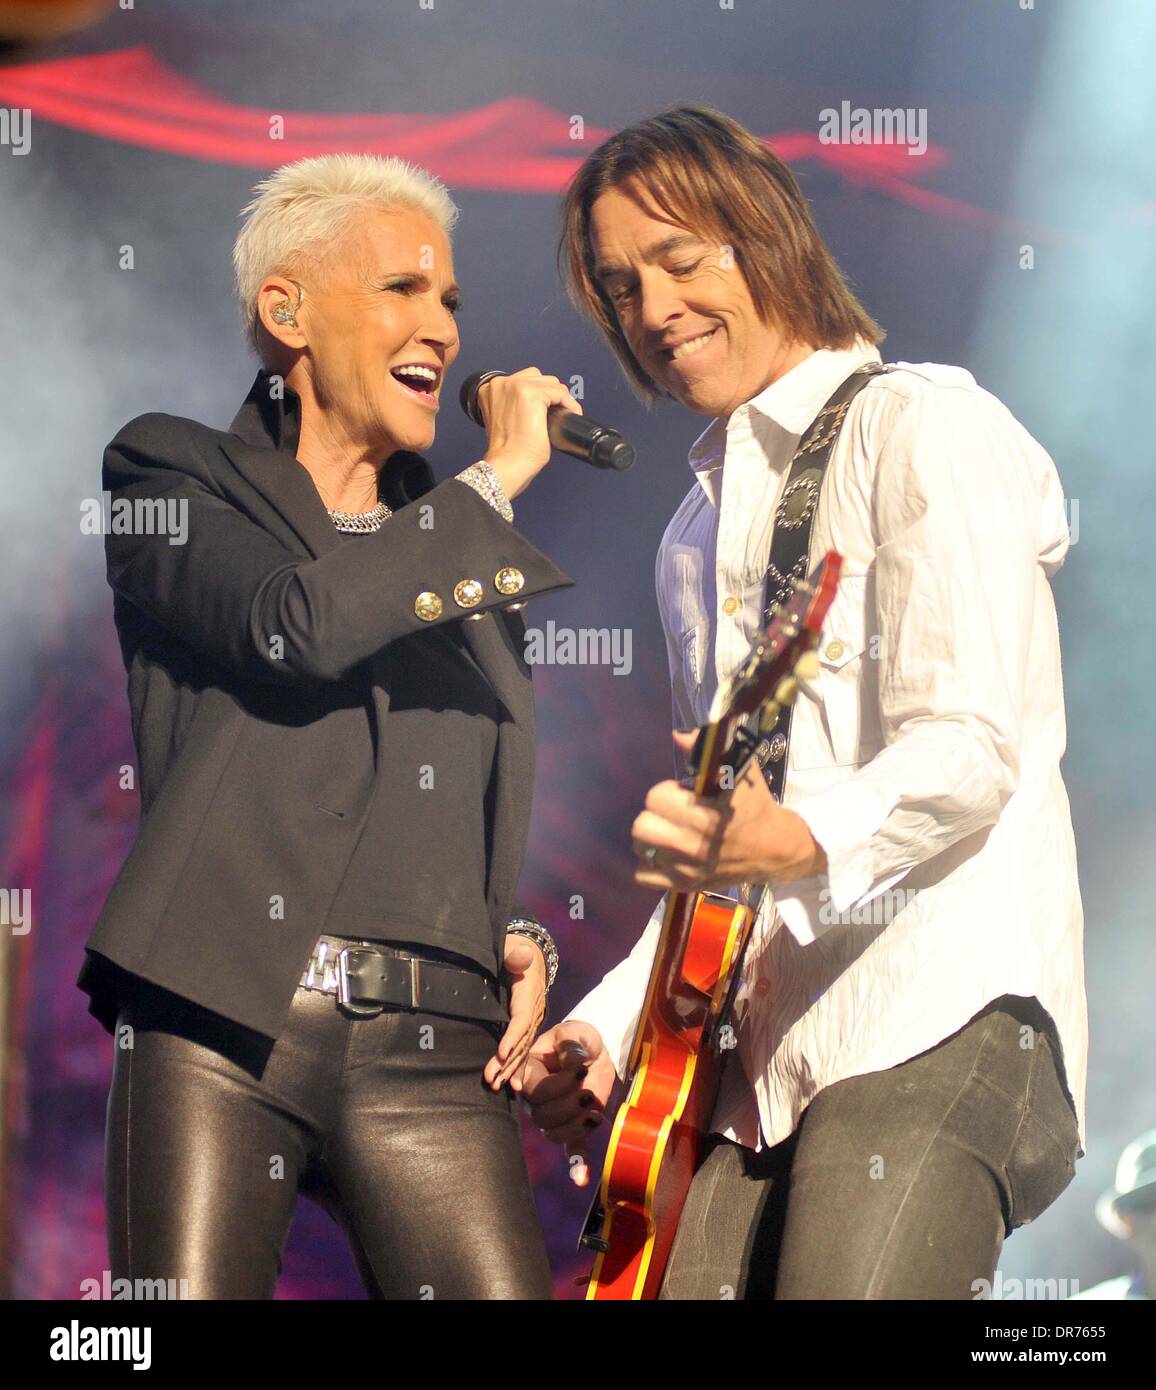 Marie Fredriksson and Per Gessle of  Roxette performs live at the 02 Arena in Dublin Dublin, Ireland - 09.07.12 Stock Photo